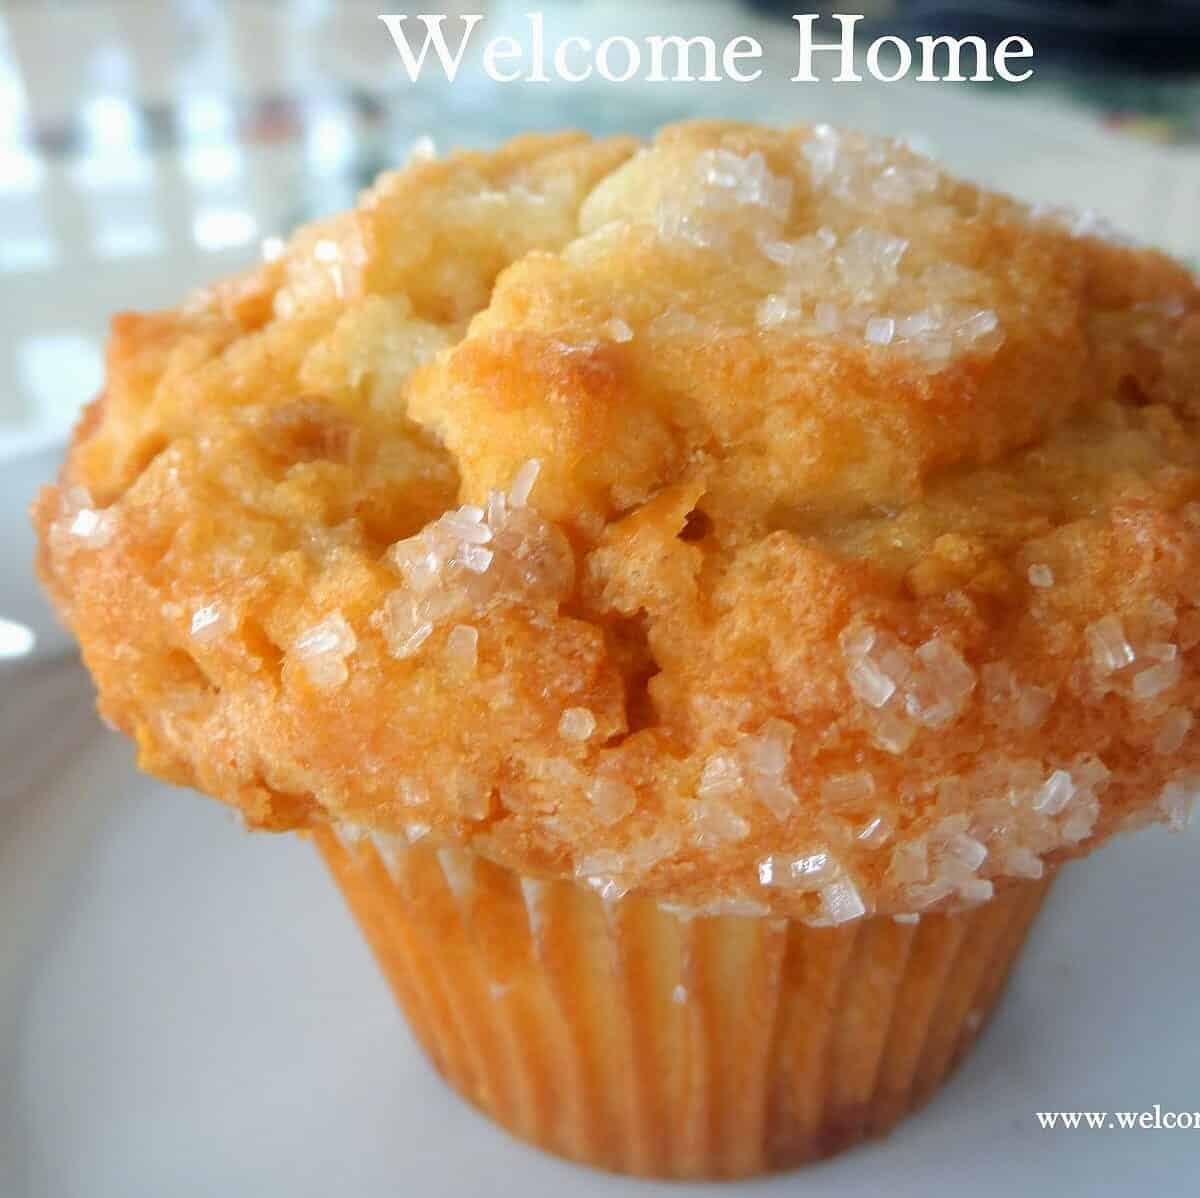  Who needs a drink when you can have these Hot Buttered Rum Muffins?